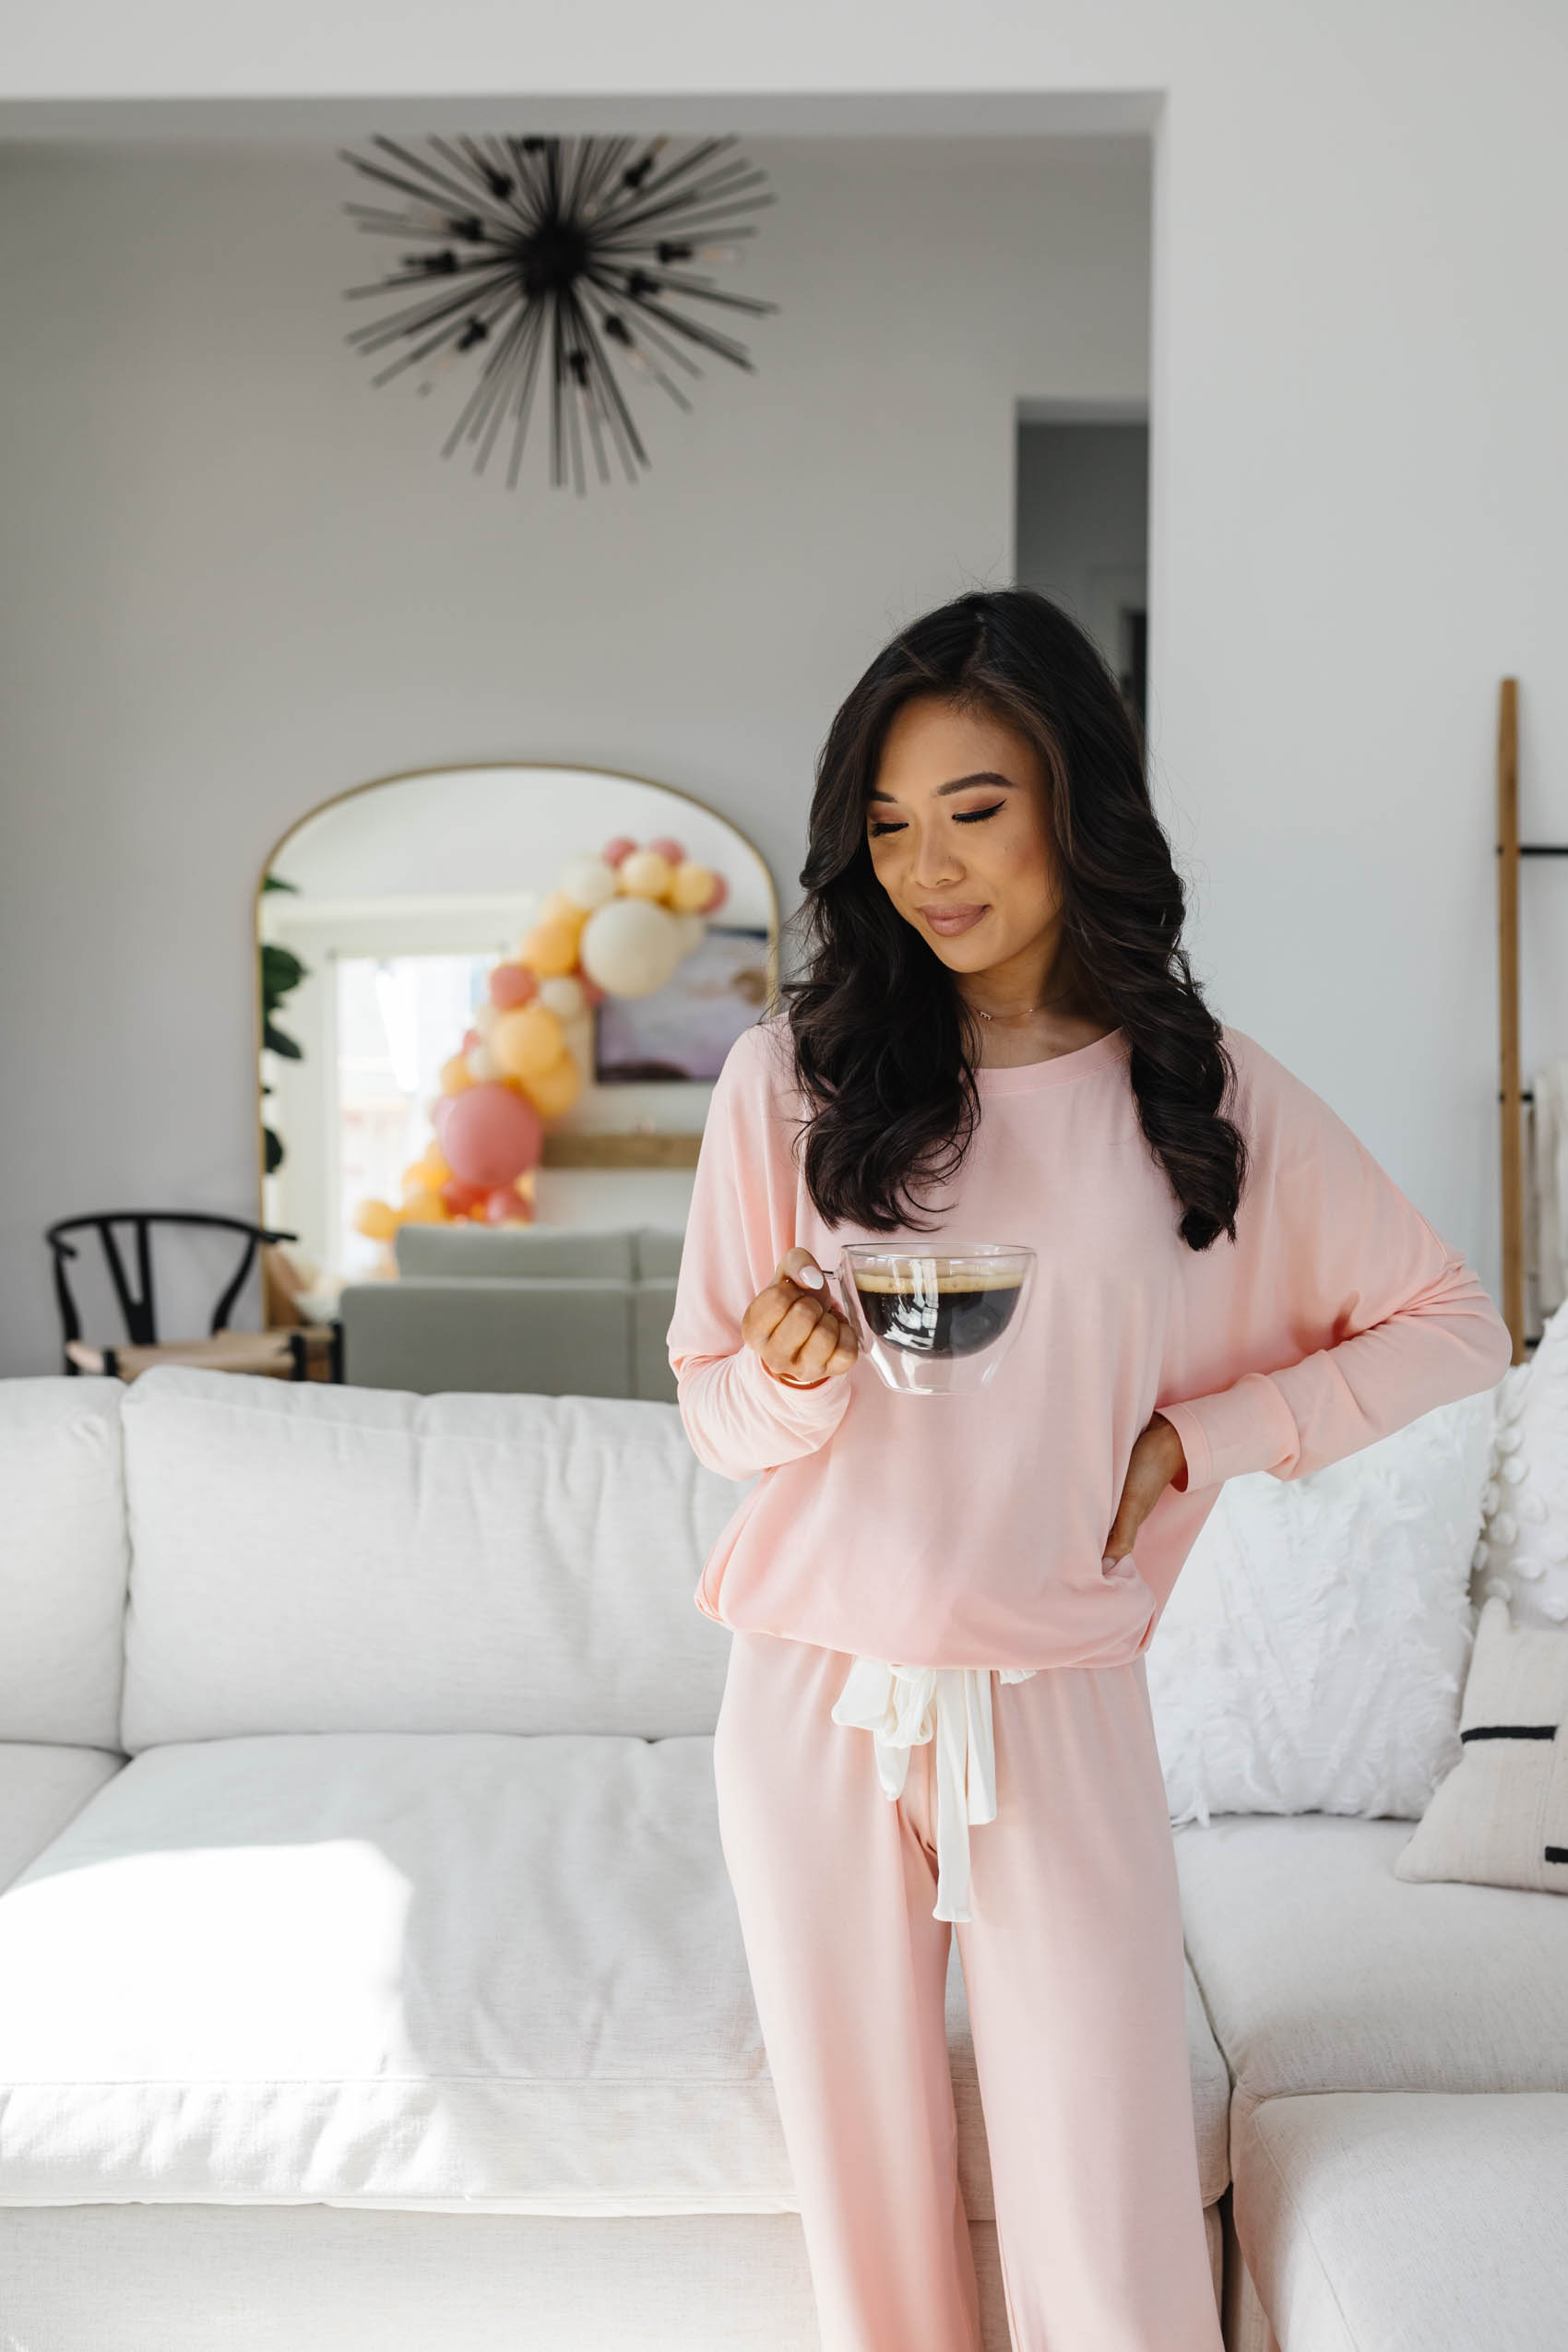 Blogger Hoang-Kim wears a pink eberjey pajama set holding a glass coffee mug in her living room decorated with an Arhaus Beale sofa, rejuvenation arch mirror in her Dallas home